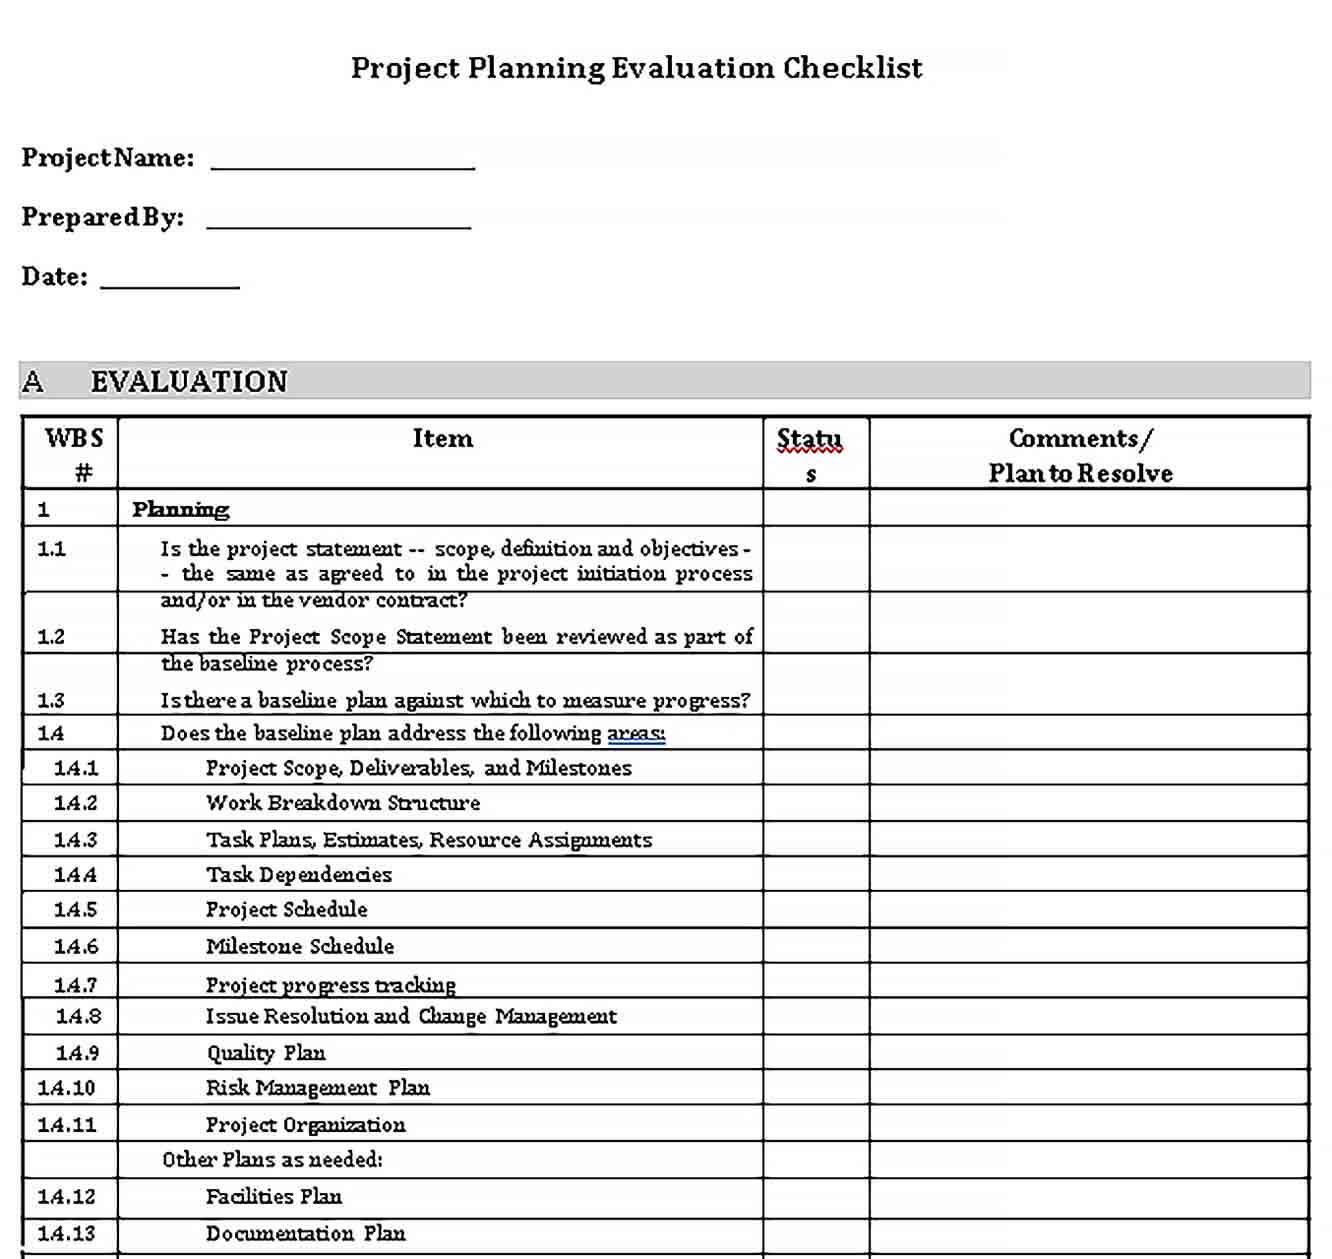 Sample Project Planning Evaluation Checklist